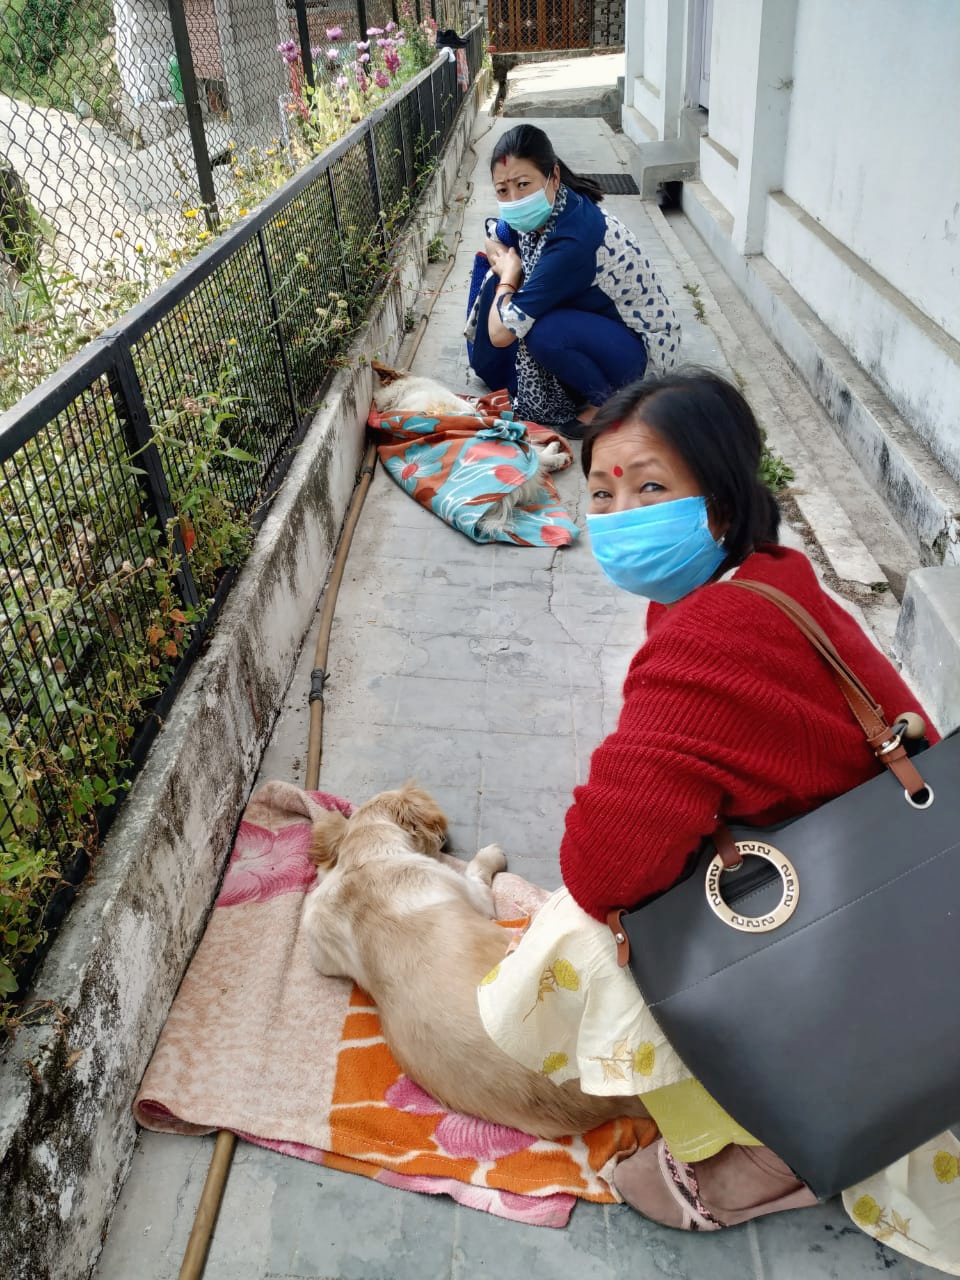 Onwers waiting for their dogs to regain consciousness after spaying at Darjeeling Animal Shelter